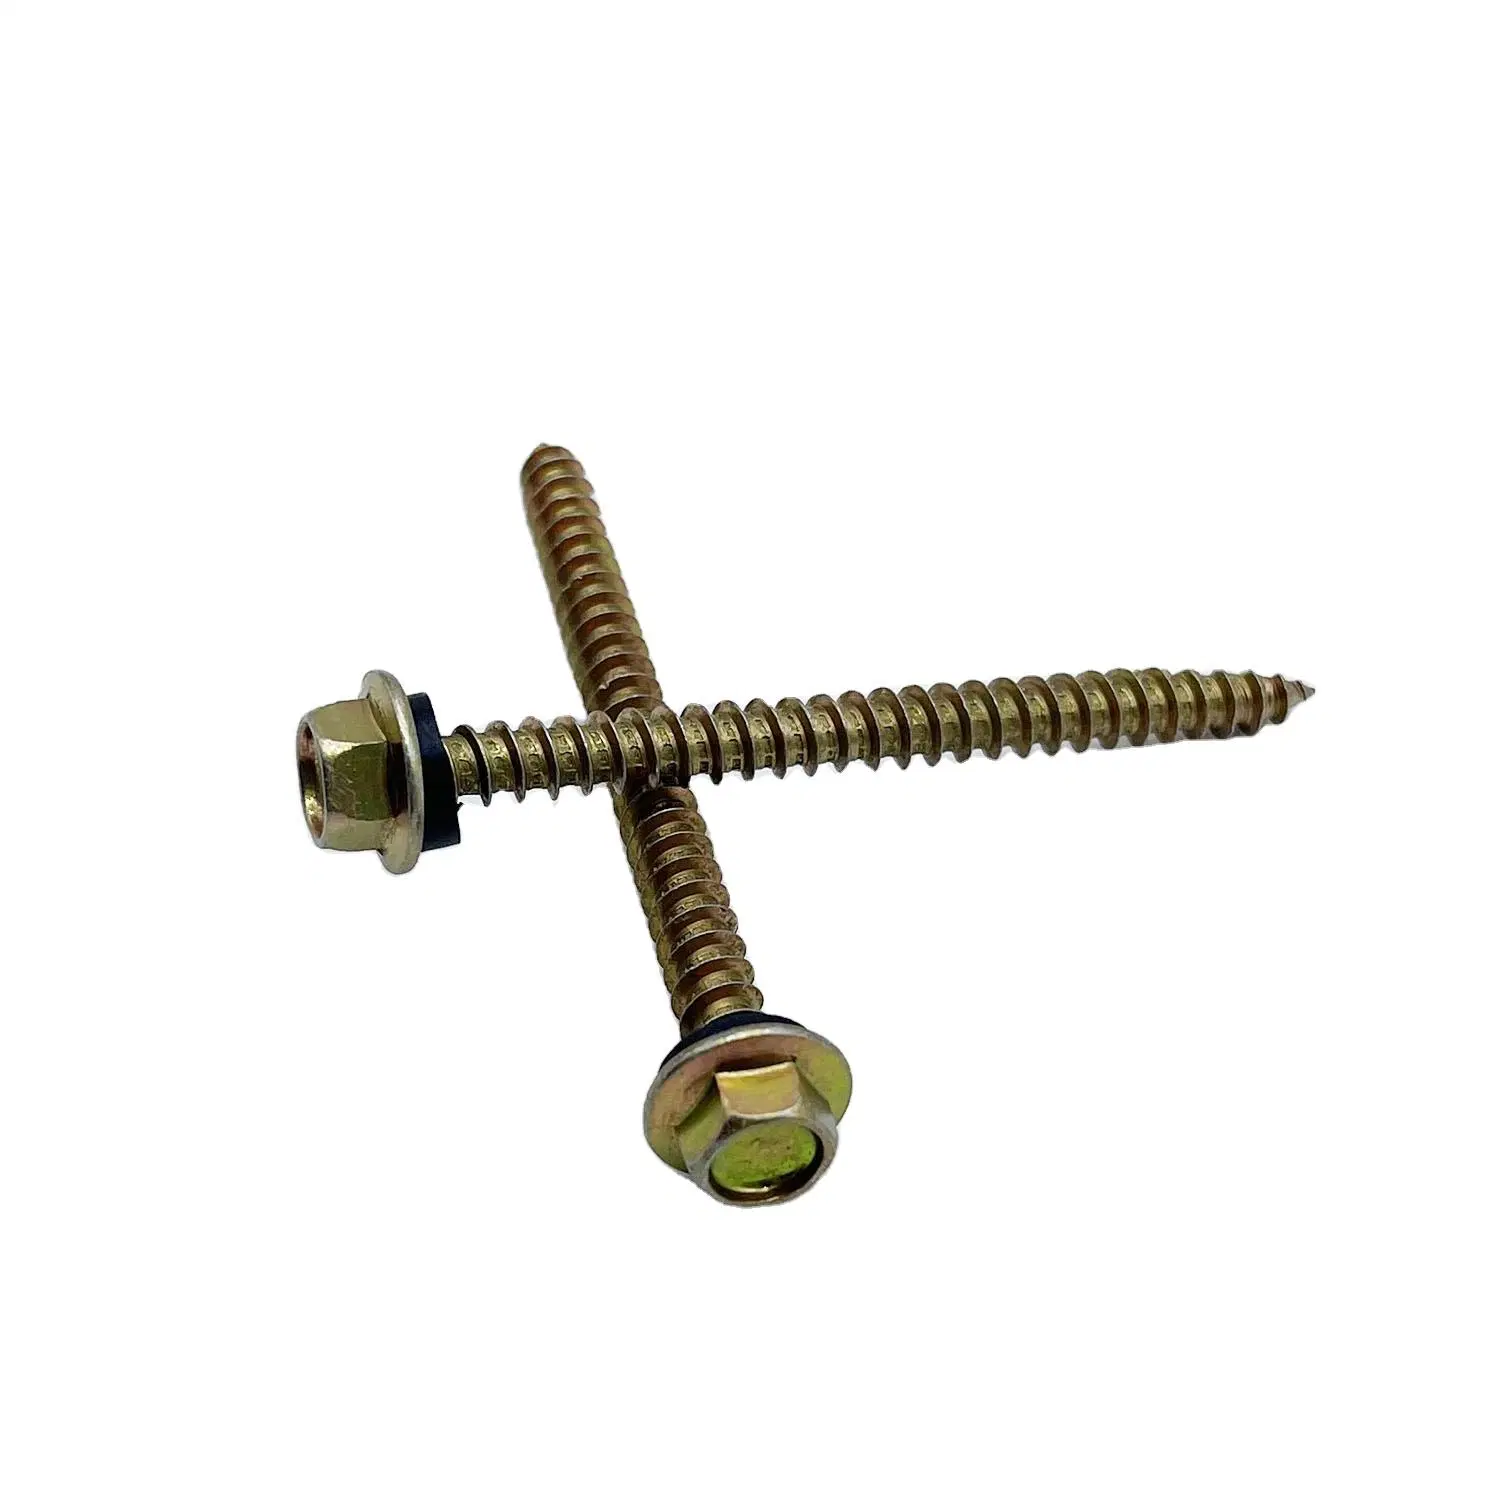 Hex Flanged Head High-Low Thread Screw with EPDM Washer